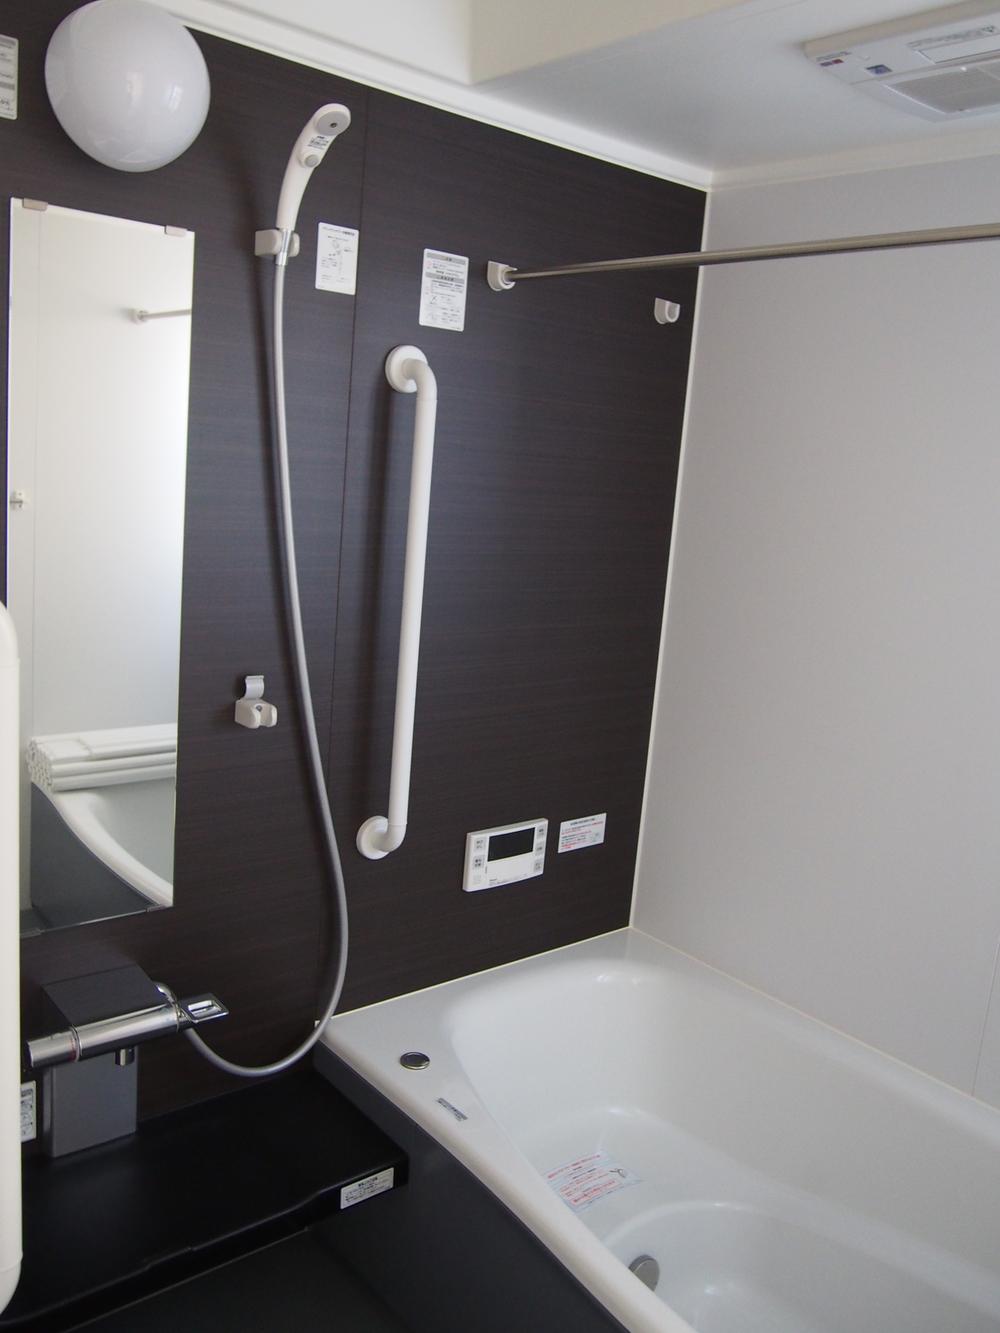 Bathroom. Bathroom ventilation drying heating is standard equipment. To clean Ease drainage port, Clean and pleasant because the floor dry and Karari!